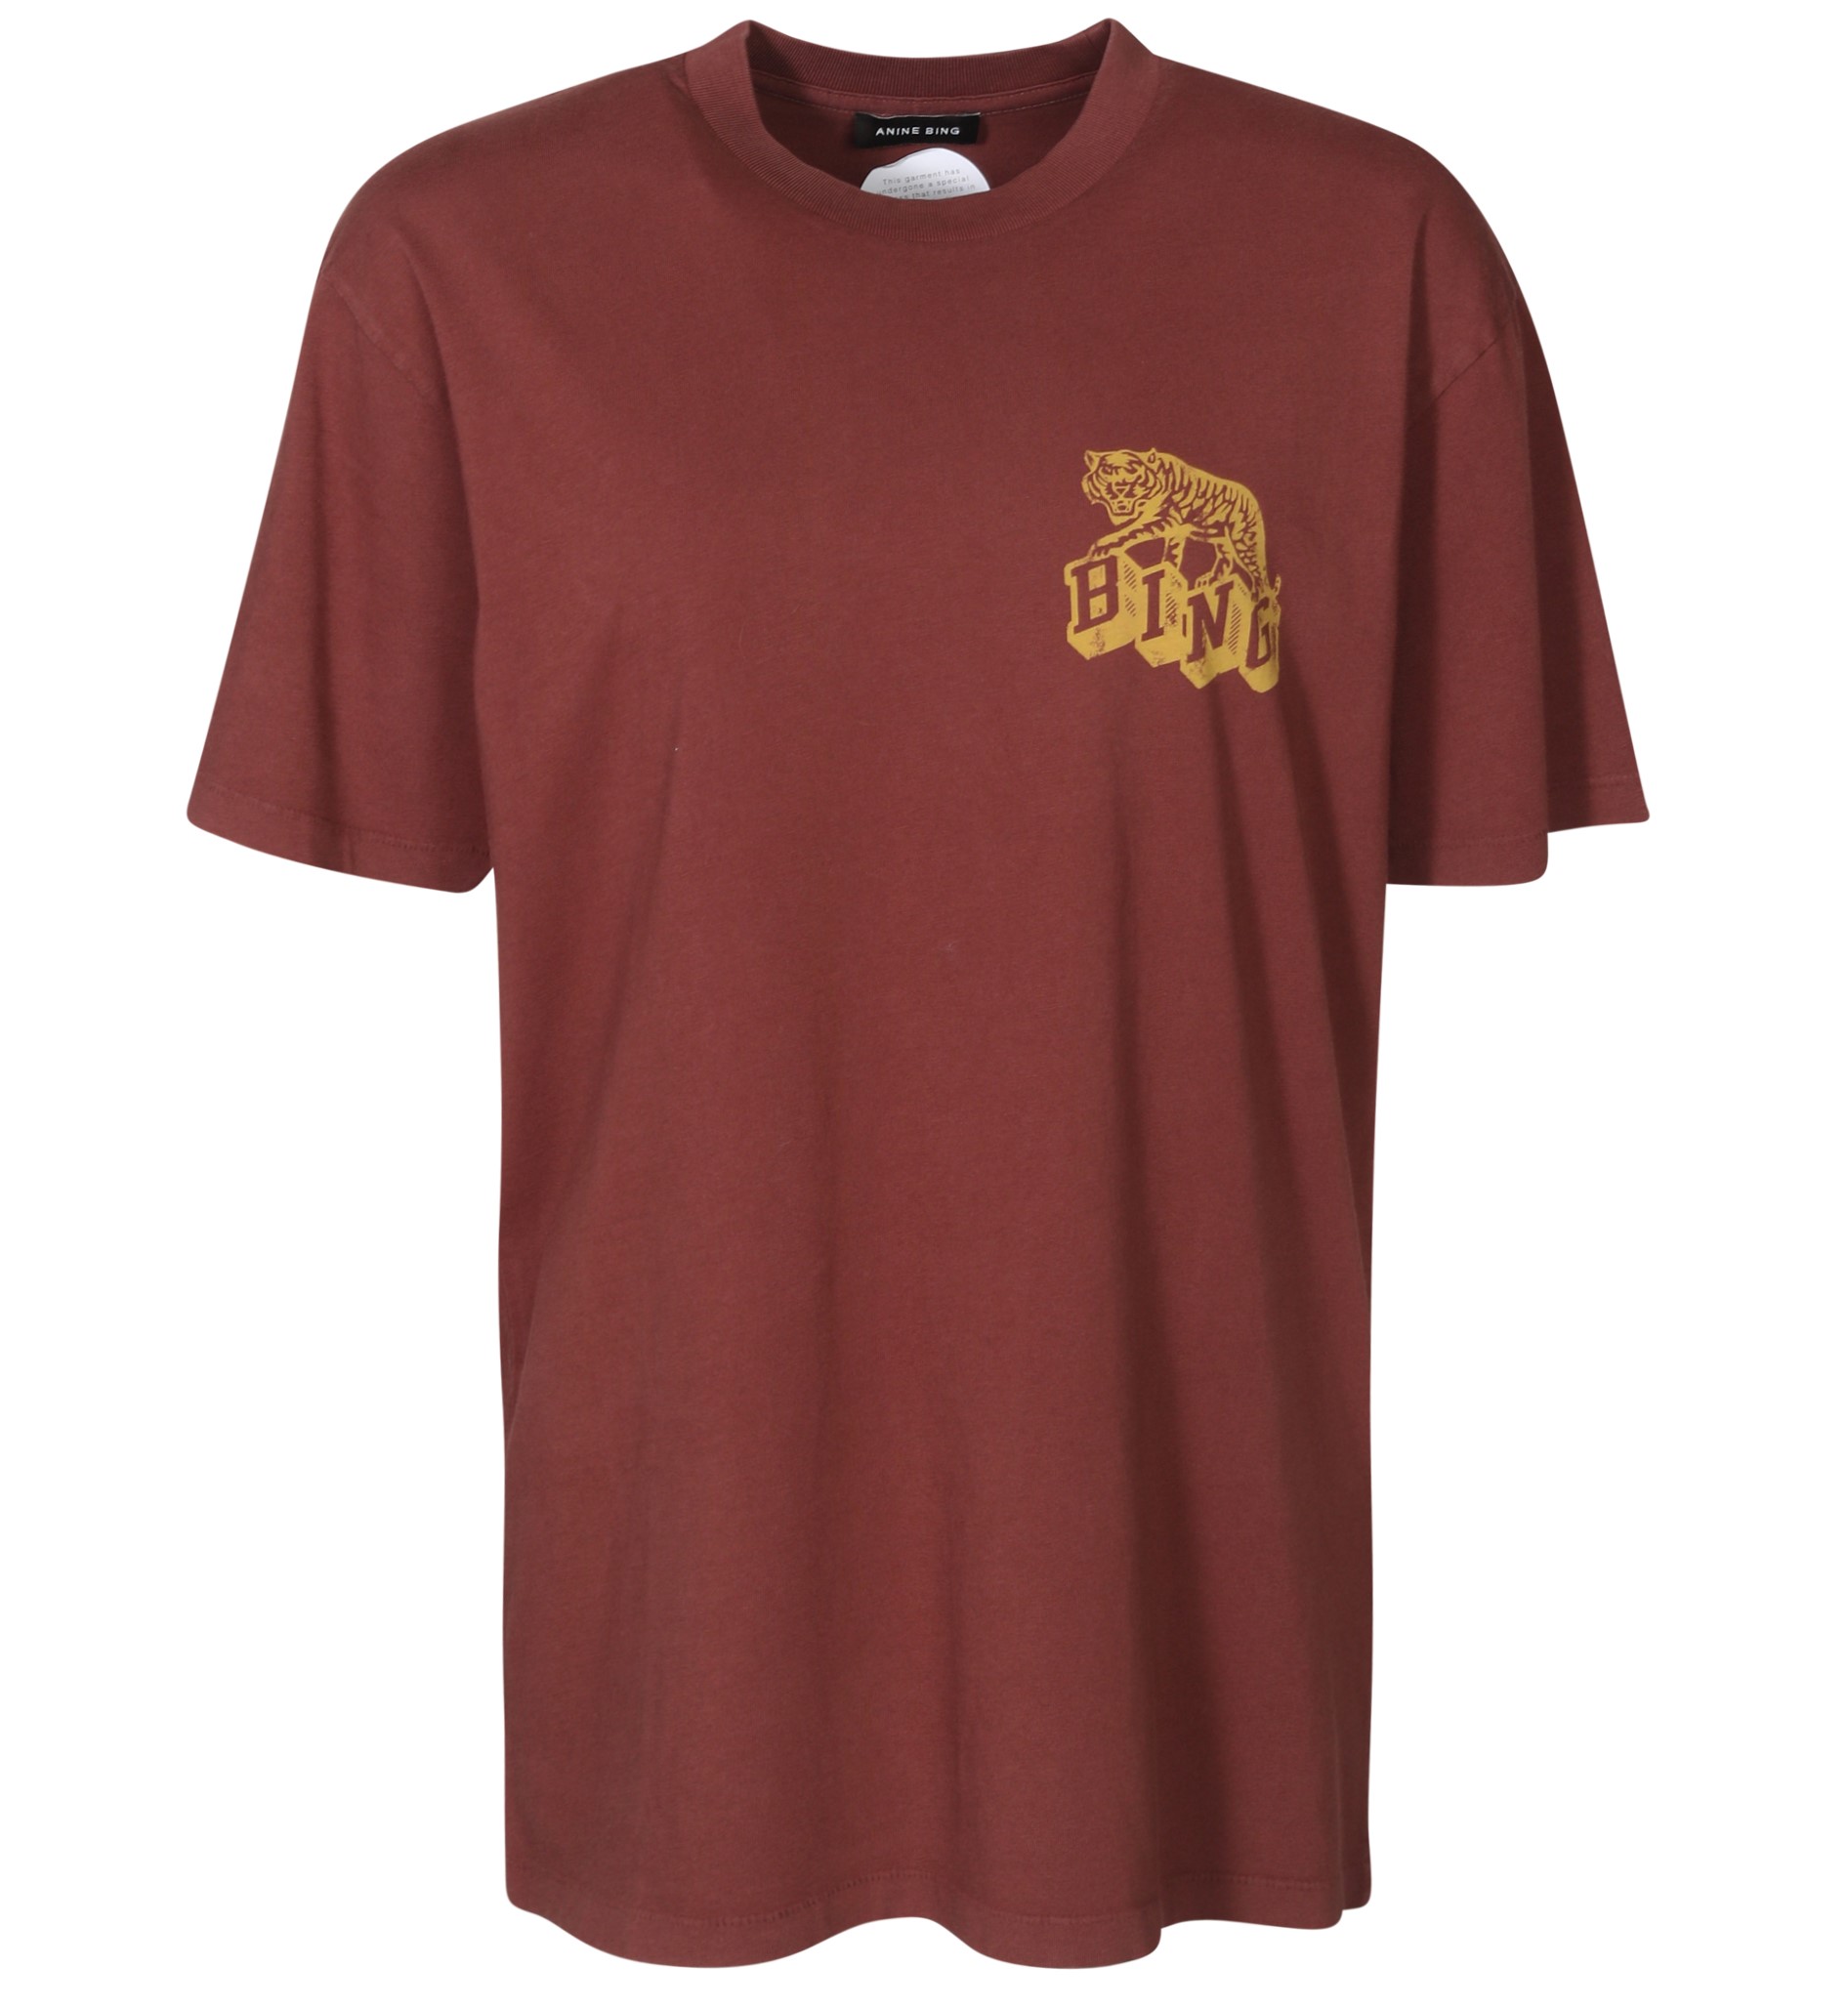 ANINE BING Walker Tee Retro Tiger in Washed Faded Cherry